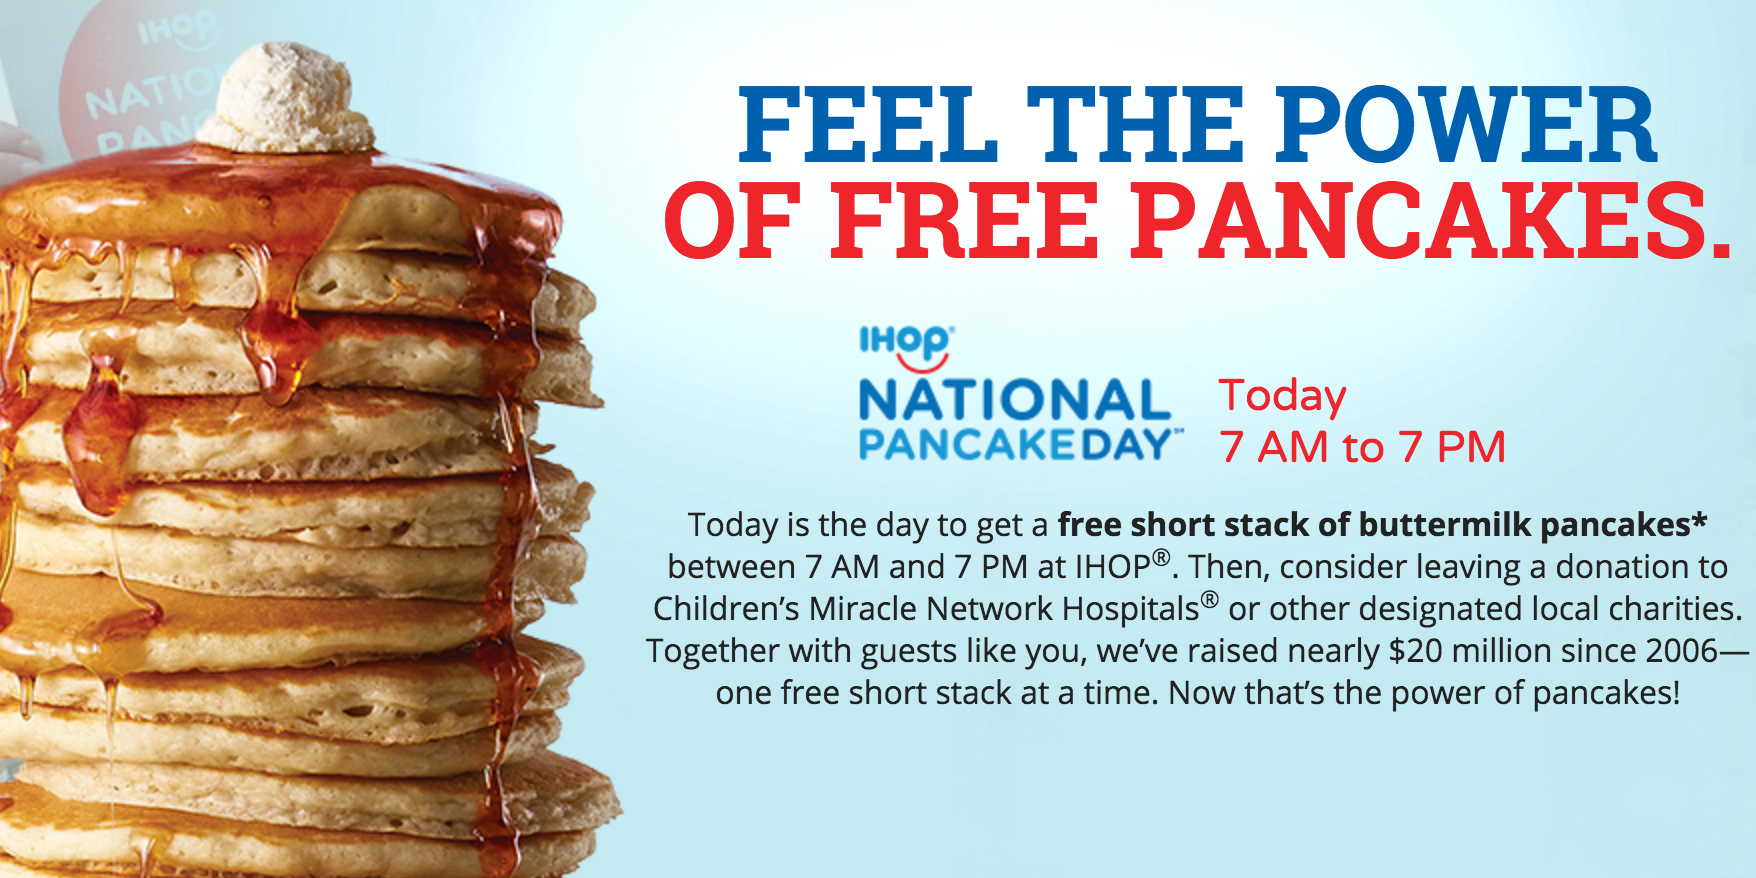 Grab a free short stack at IHOP in celebration of National Pancake Day